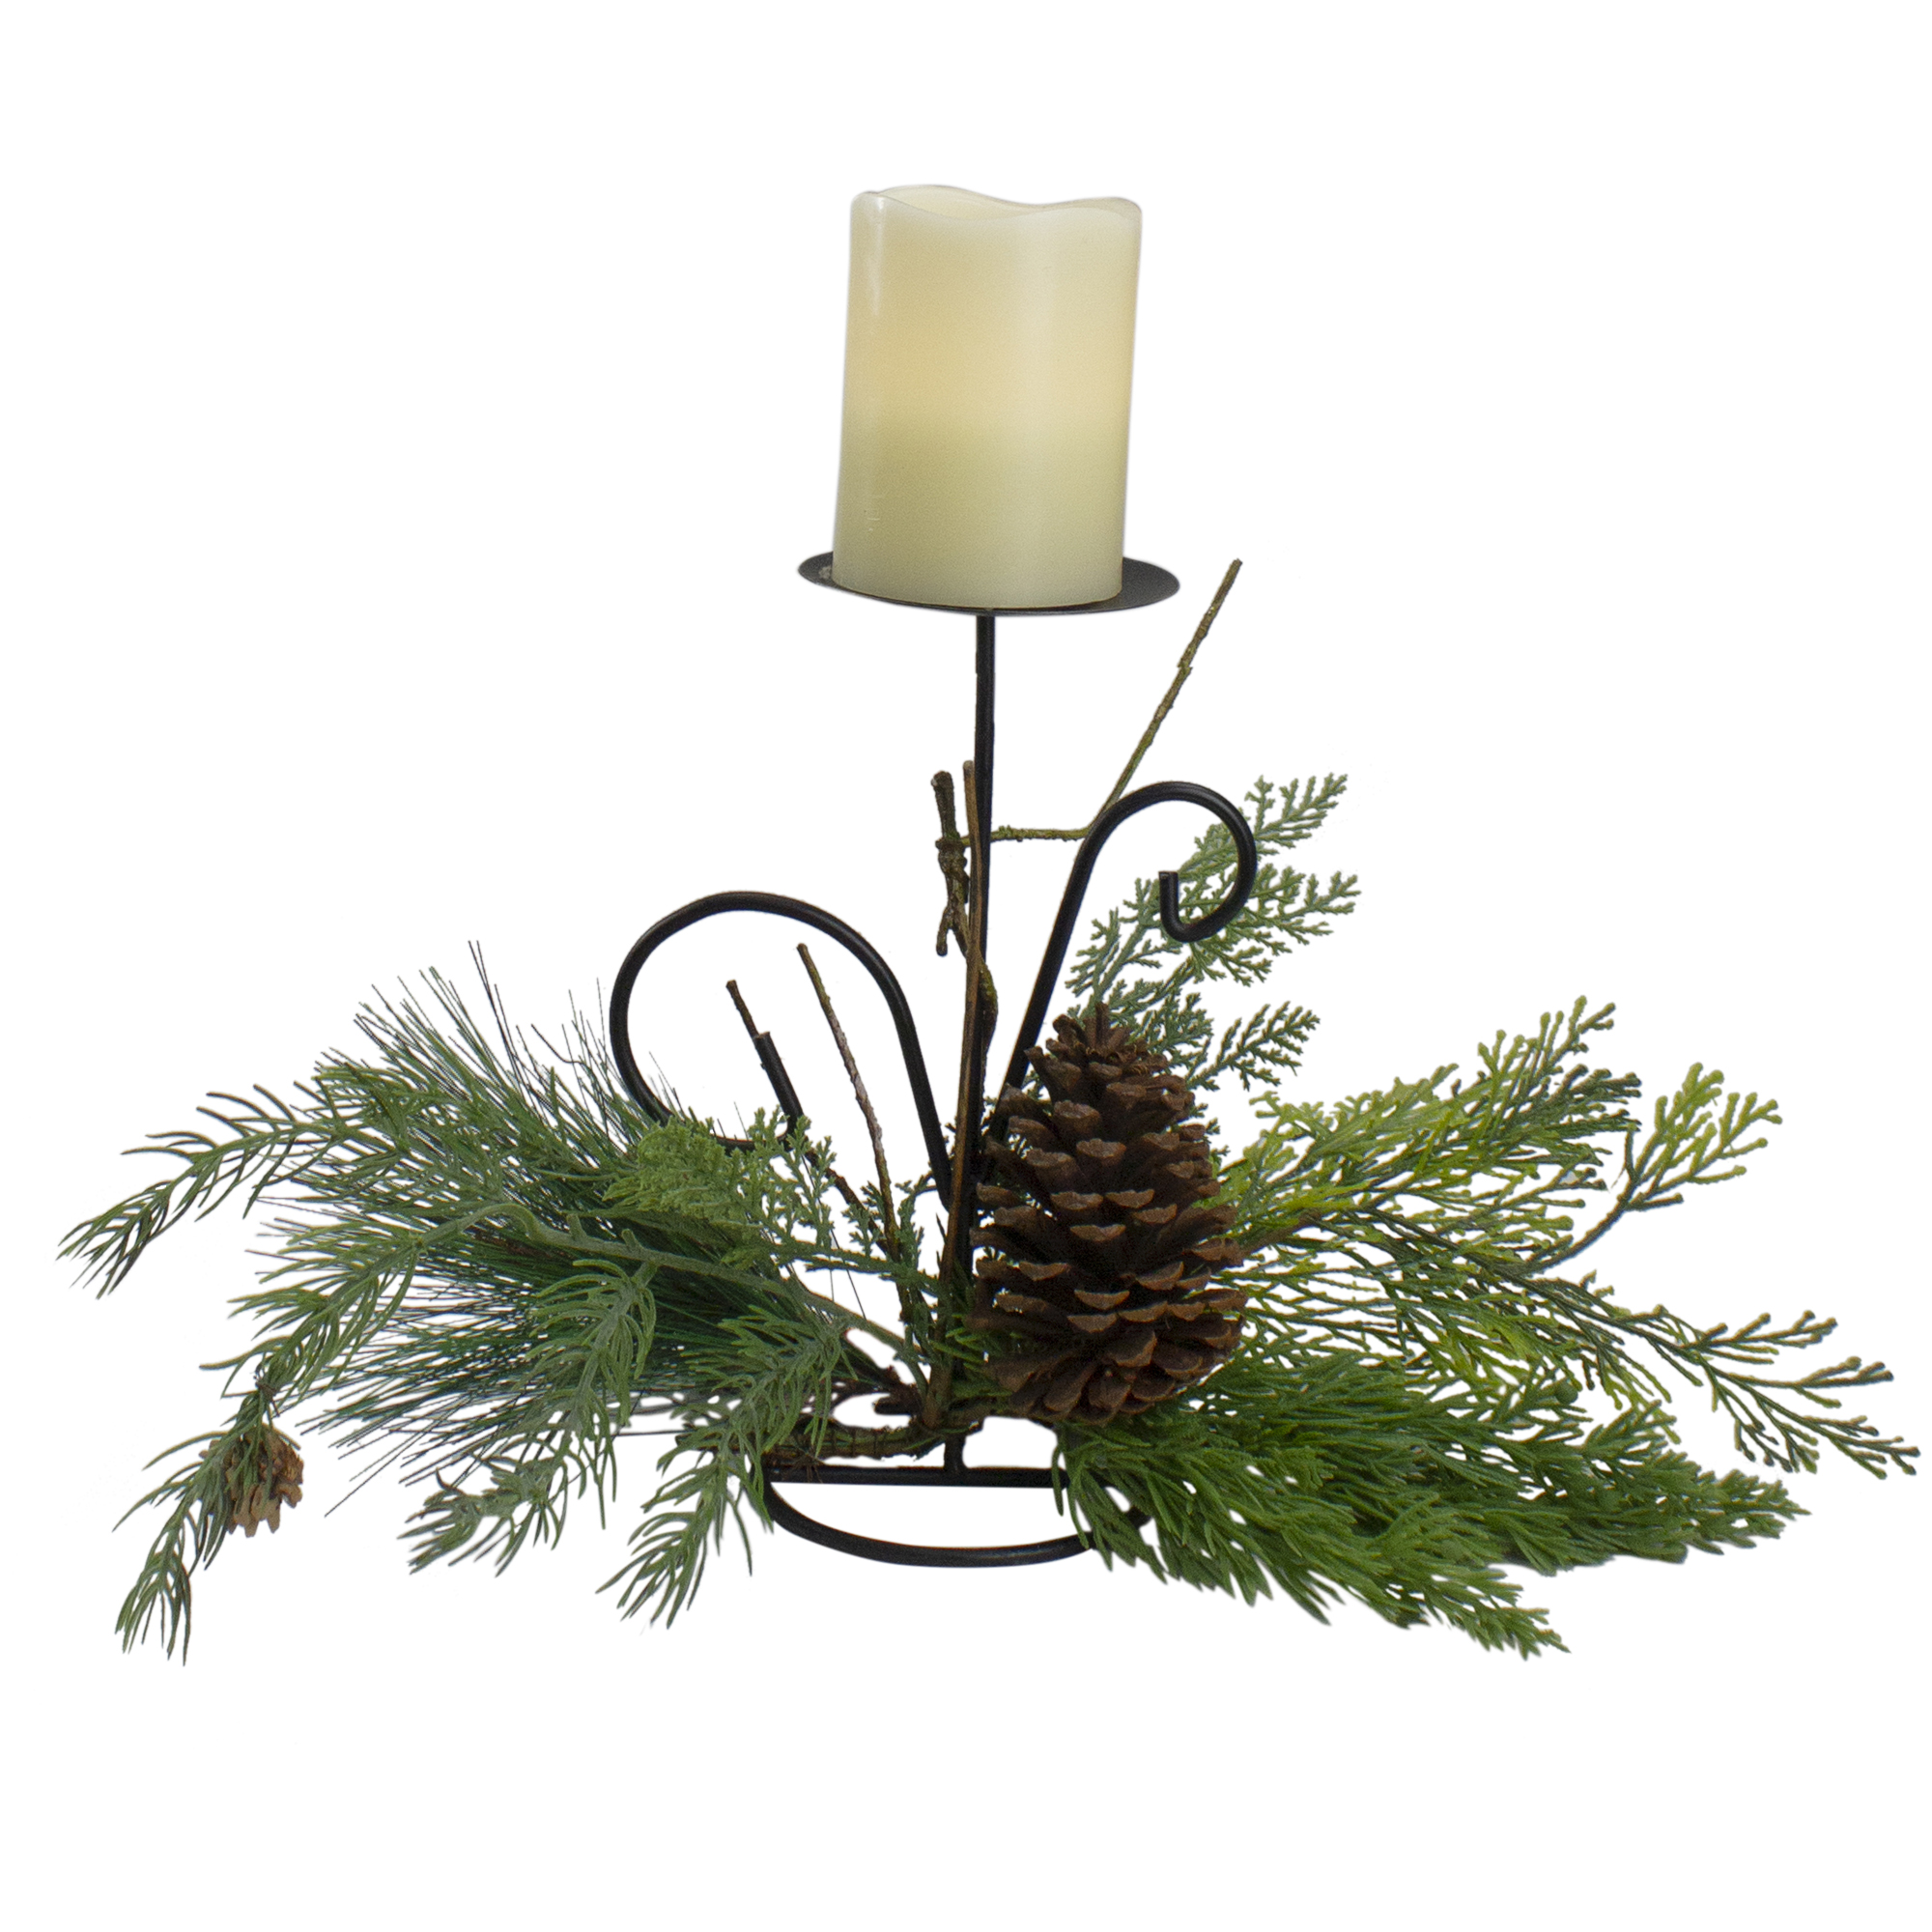 Northlight 10" Green Artificial Sprigs and Pine Cone Christmas Candle Holder, Green - image 3 of 3